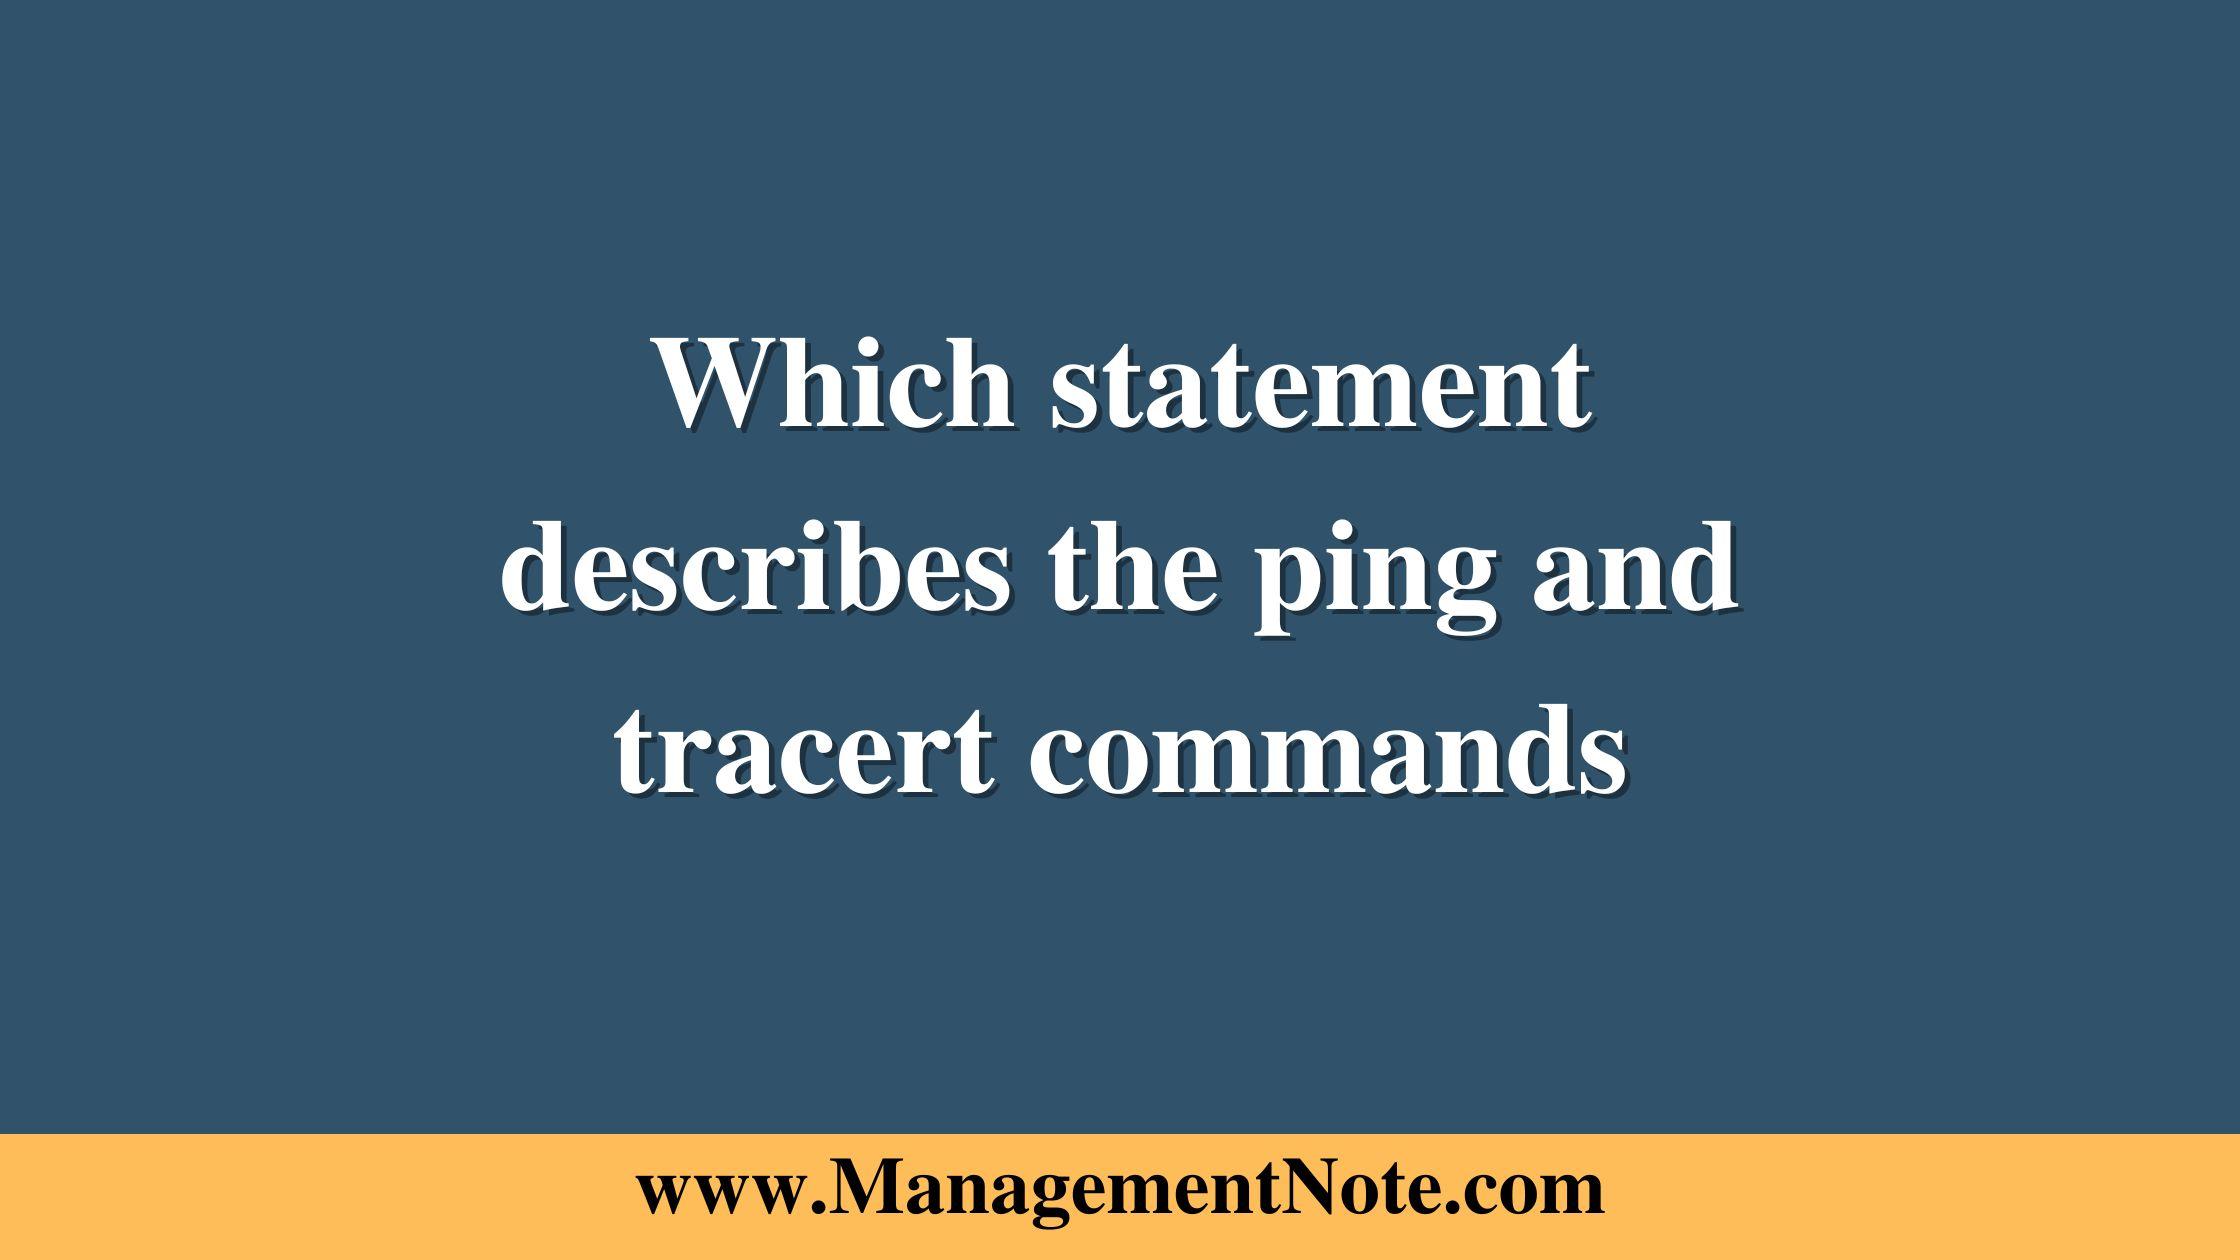 Which statement describes the ping and tracert commands